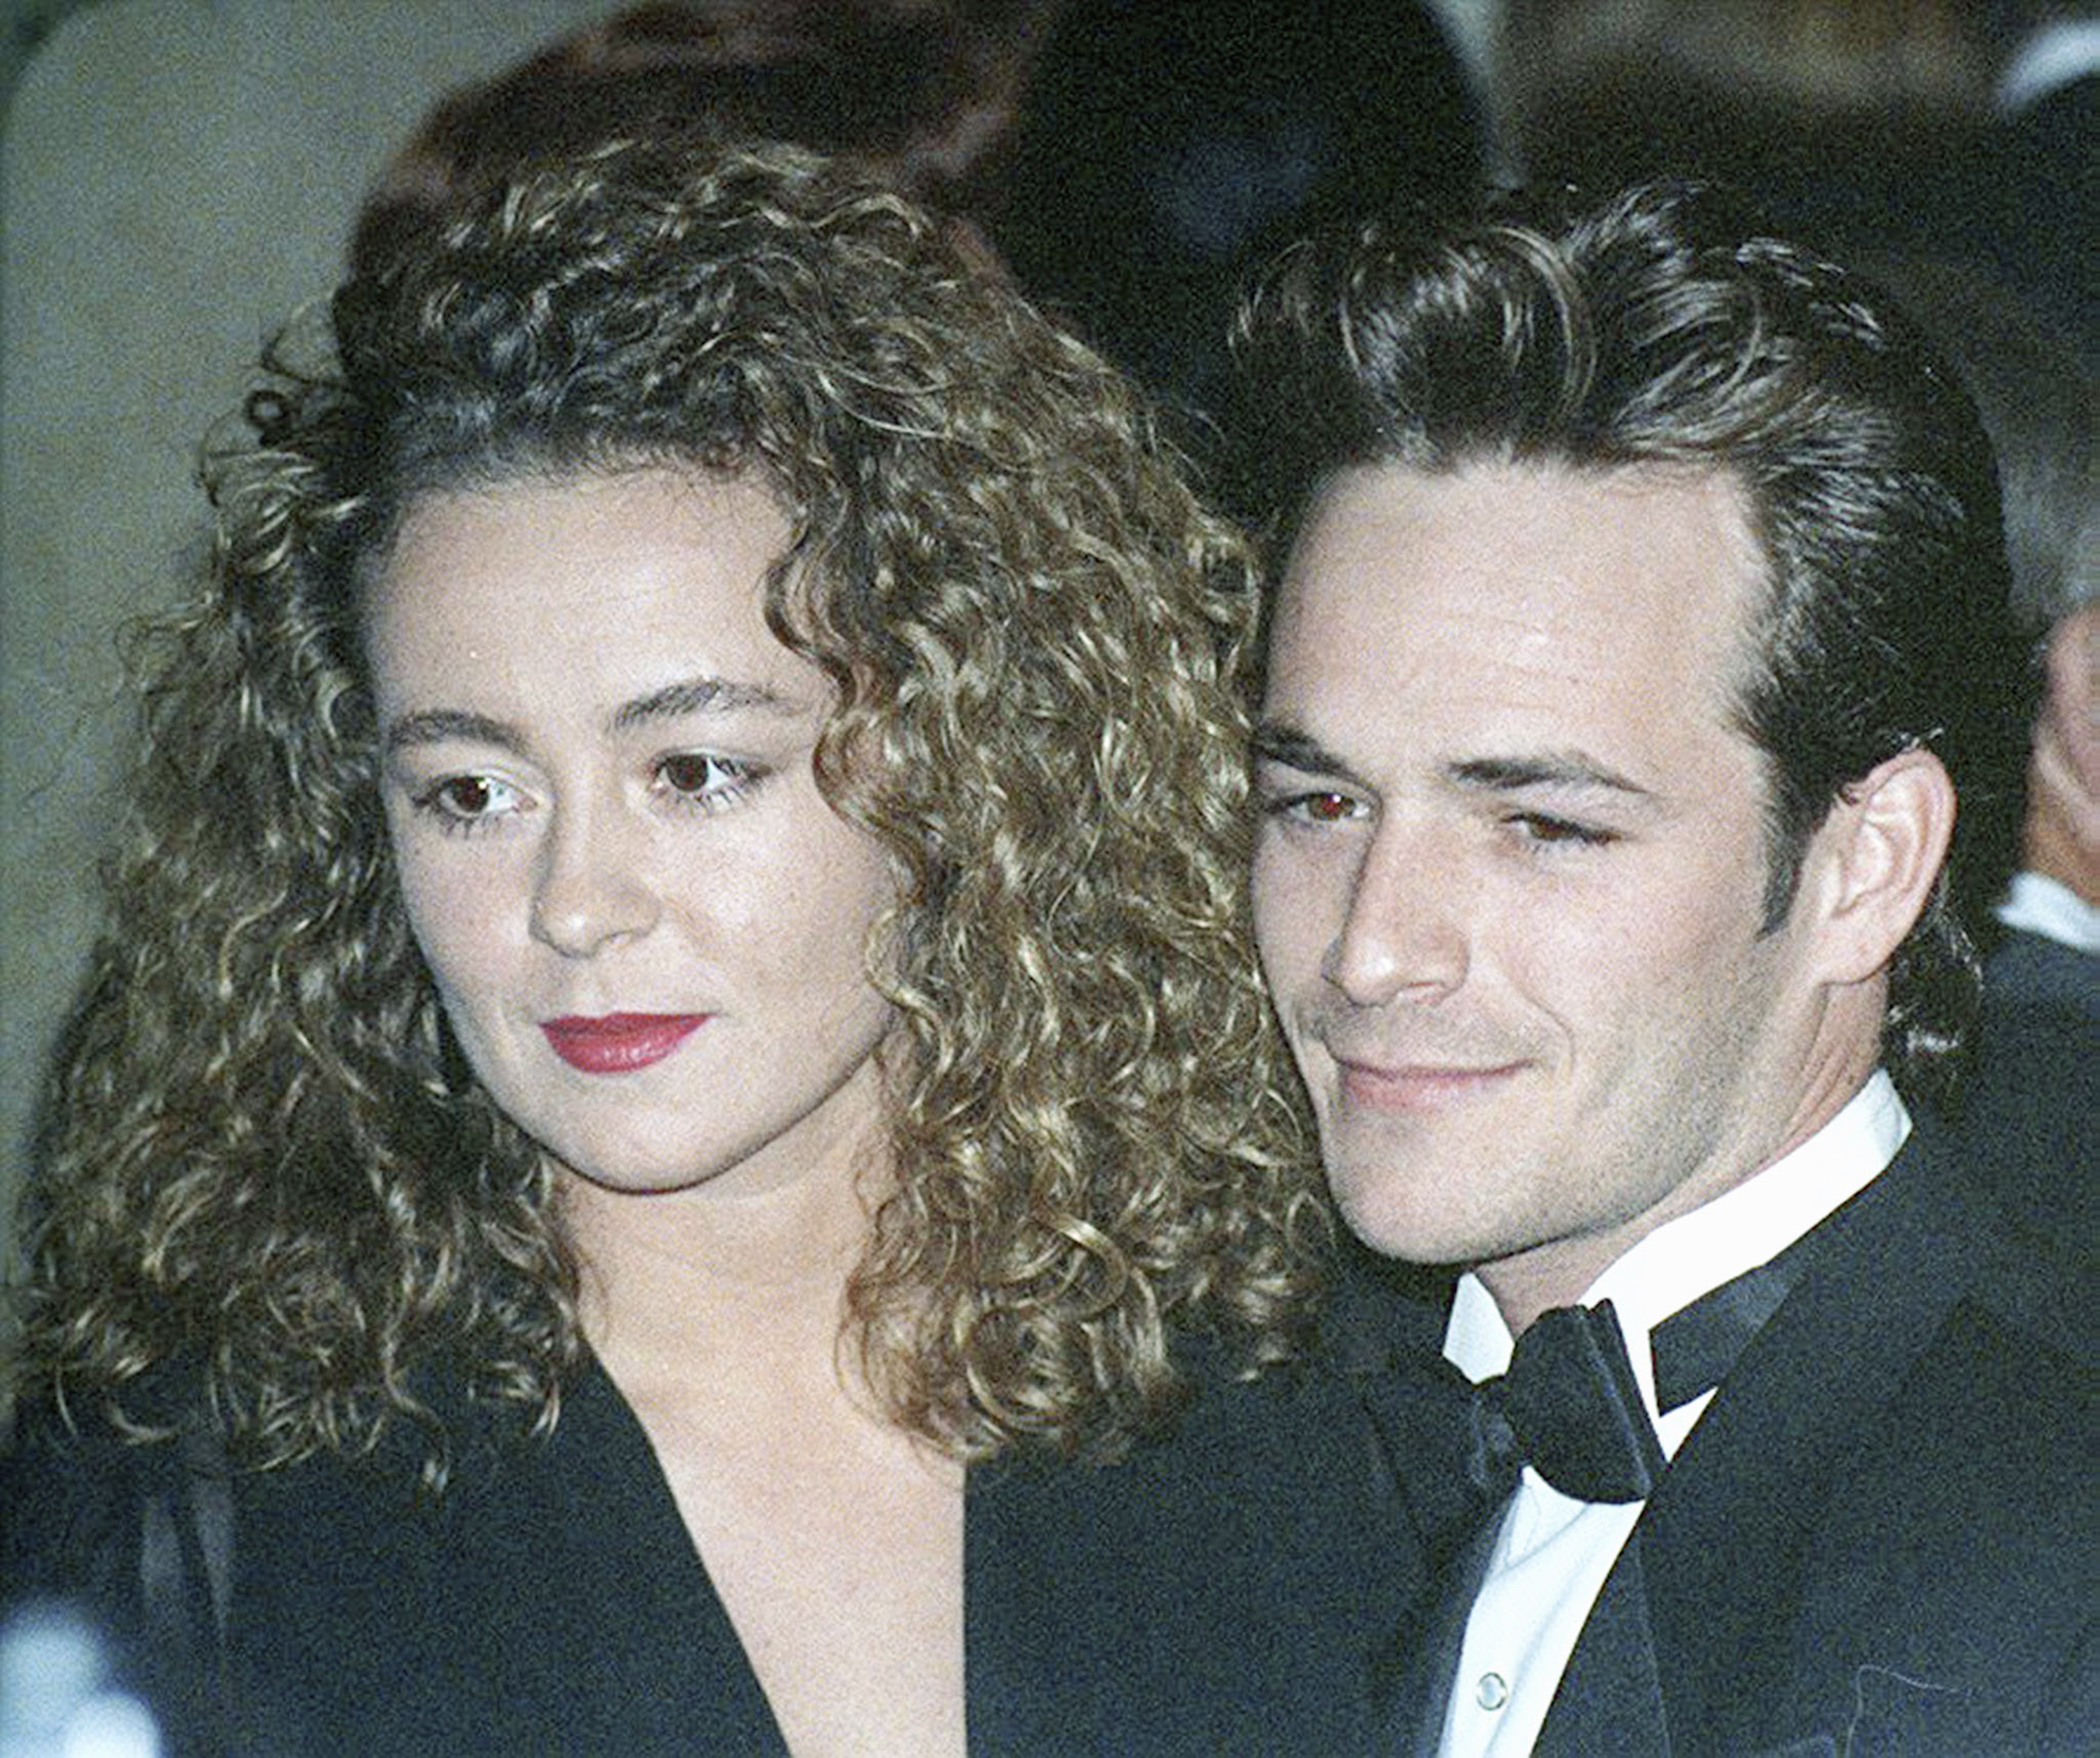 Luke Perry and Rachel Sharp in California in 1993 | Source: Getty Images